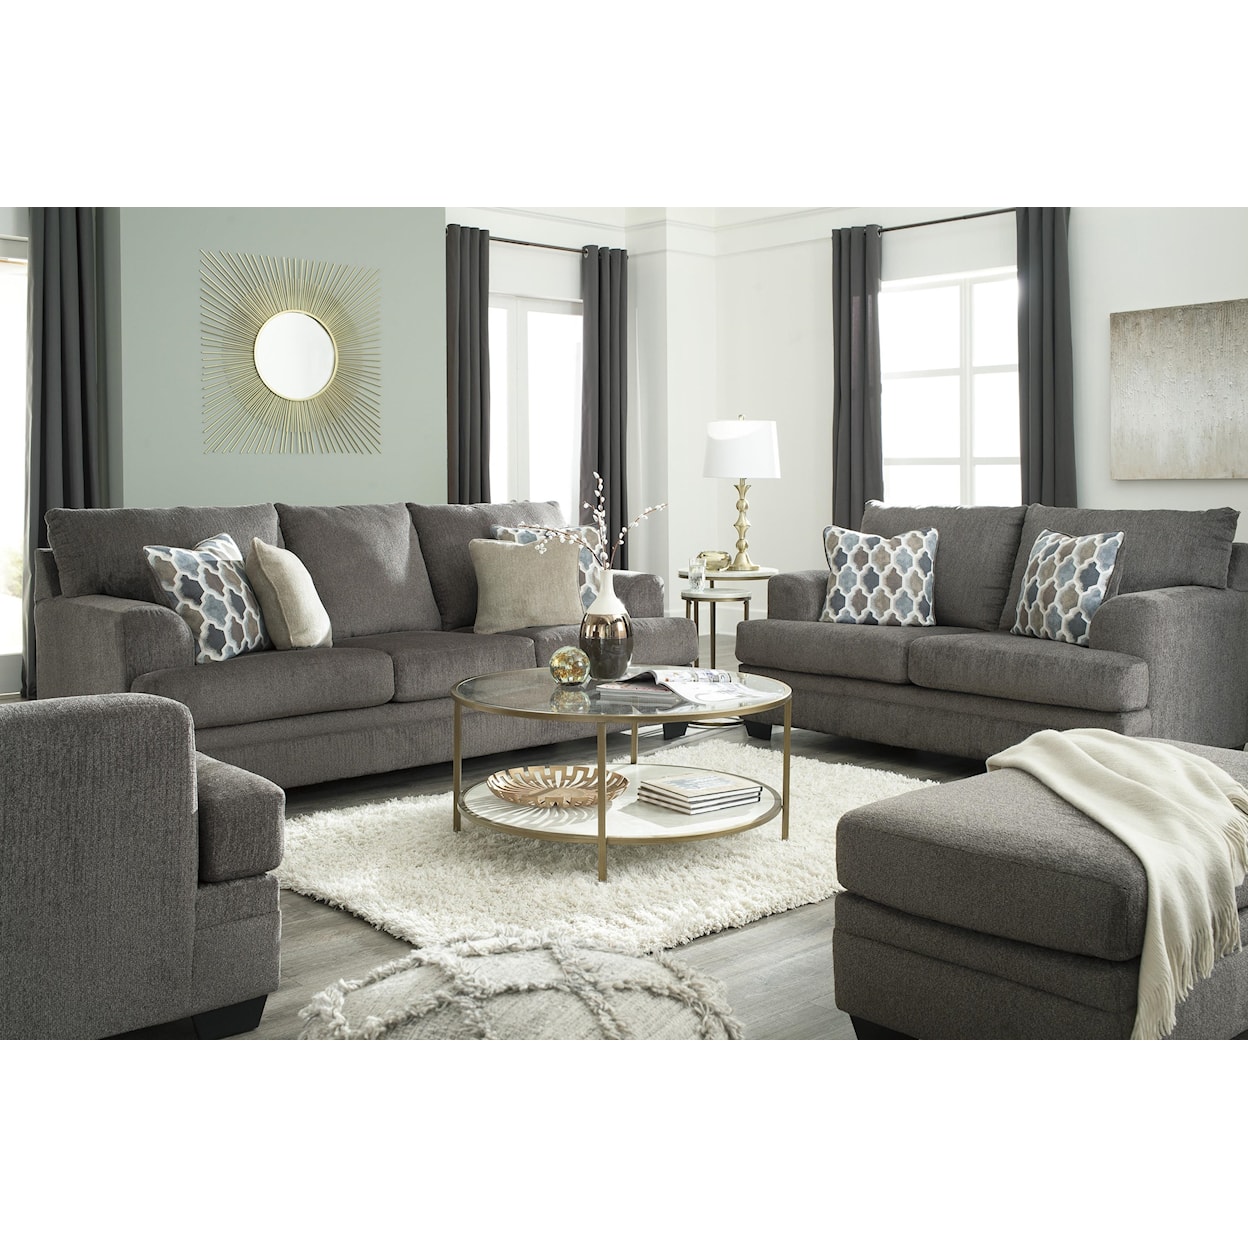 Signature Design by Ashley Dorsten Sofa, Loveseat and Chair Set